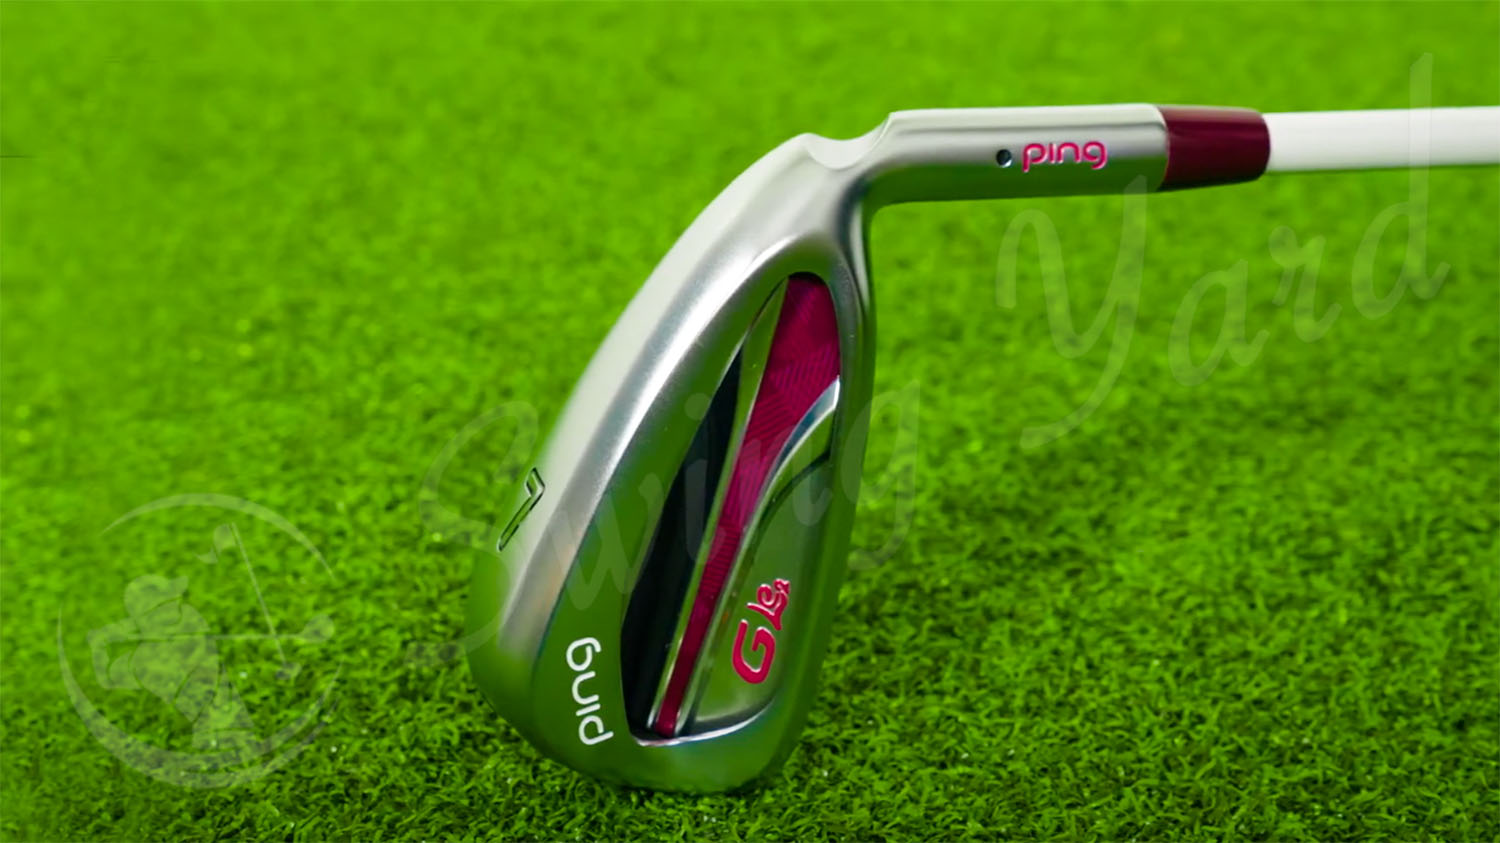 The Ping G Le2 Iron club for testing at the golf course